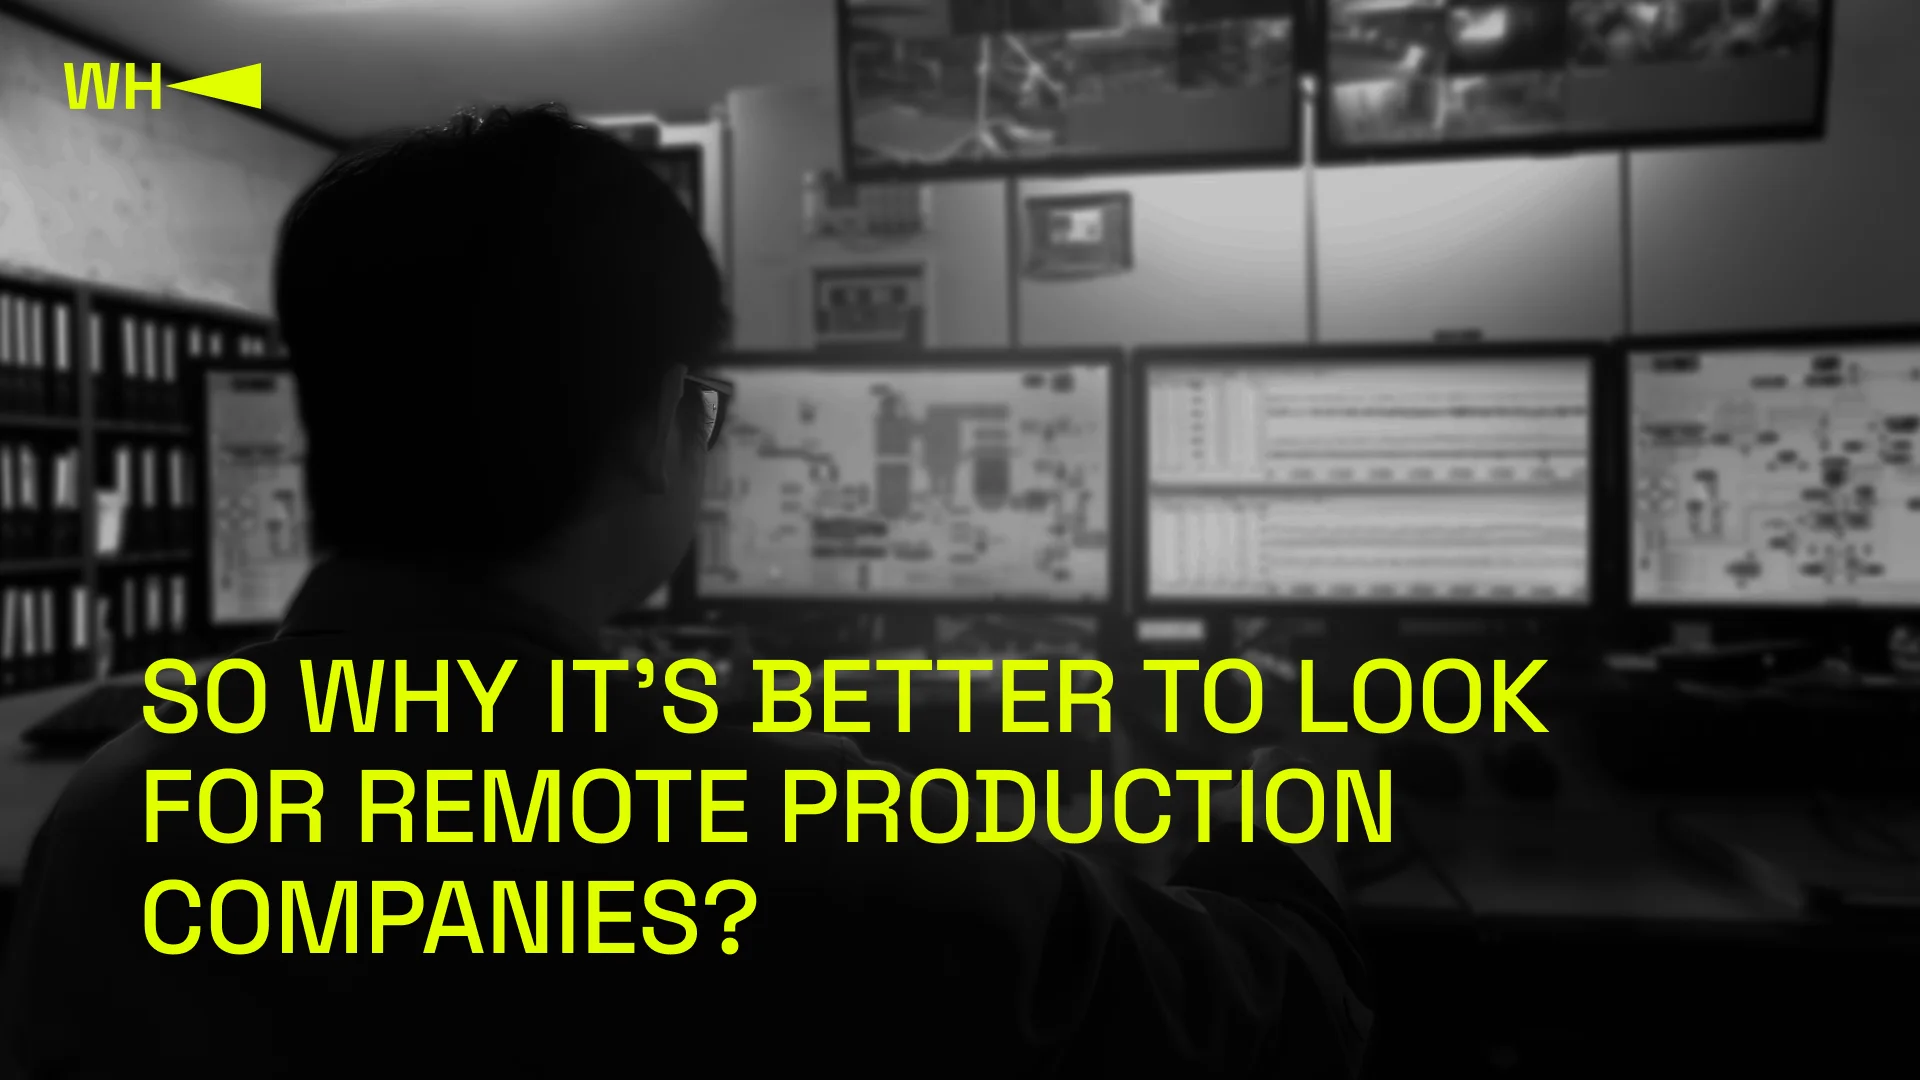 Why look for remote production companies? Credit: WePlay Holding